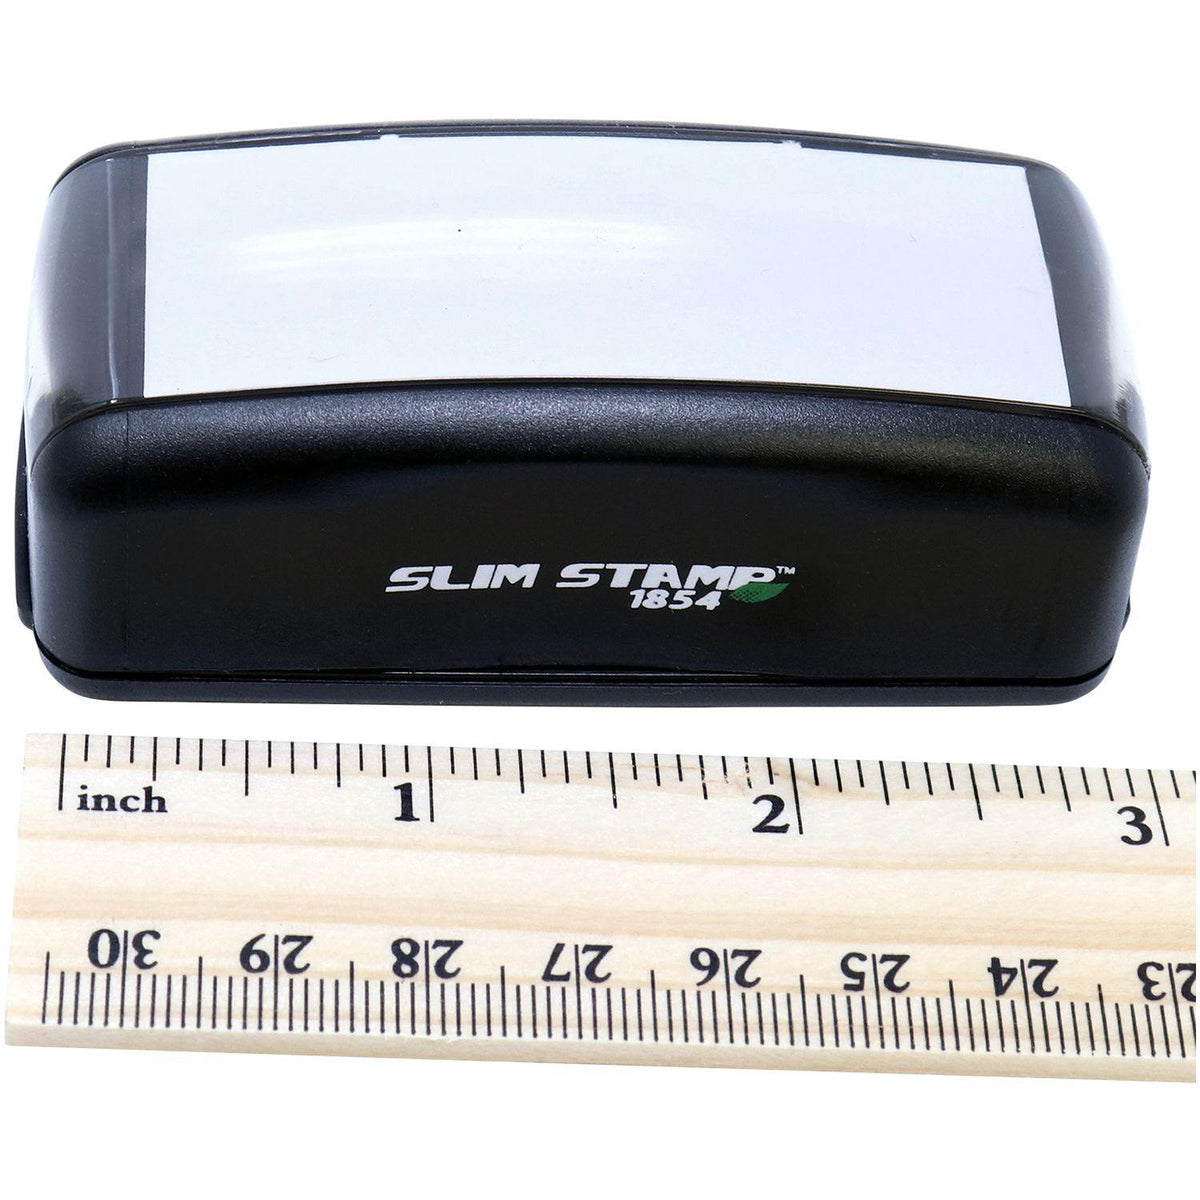 Measurement Large Pre Inked Void Stamp with Ruler